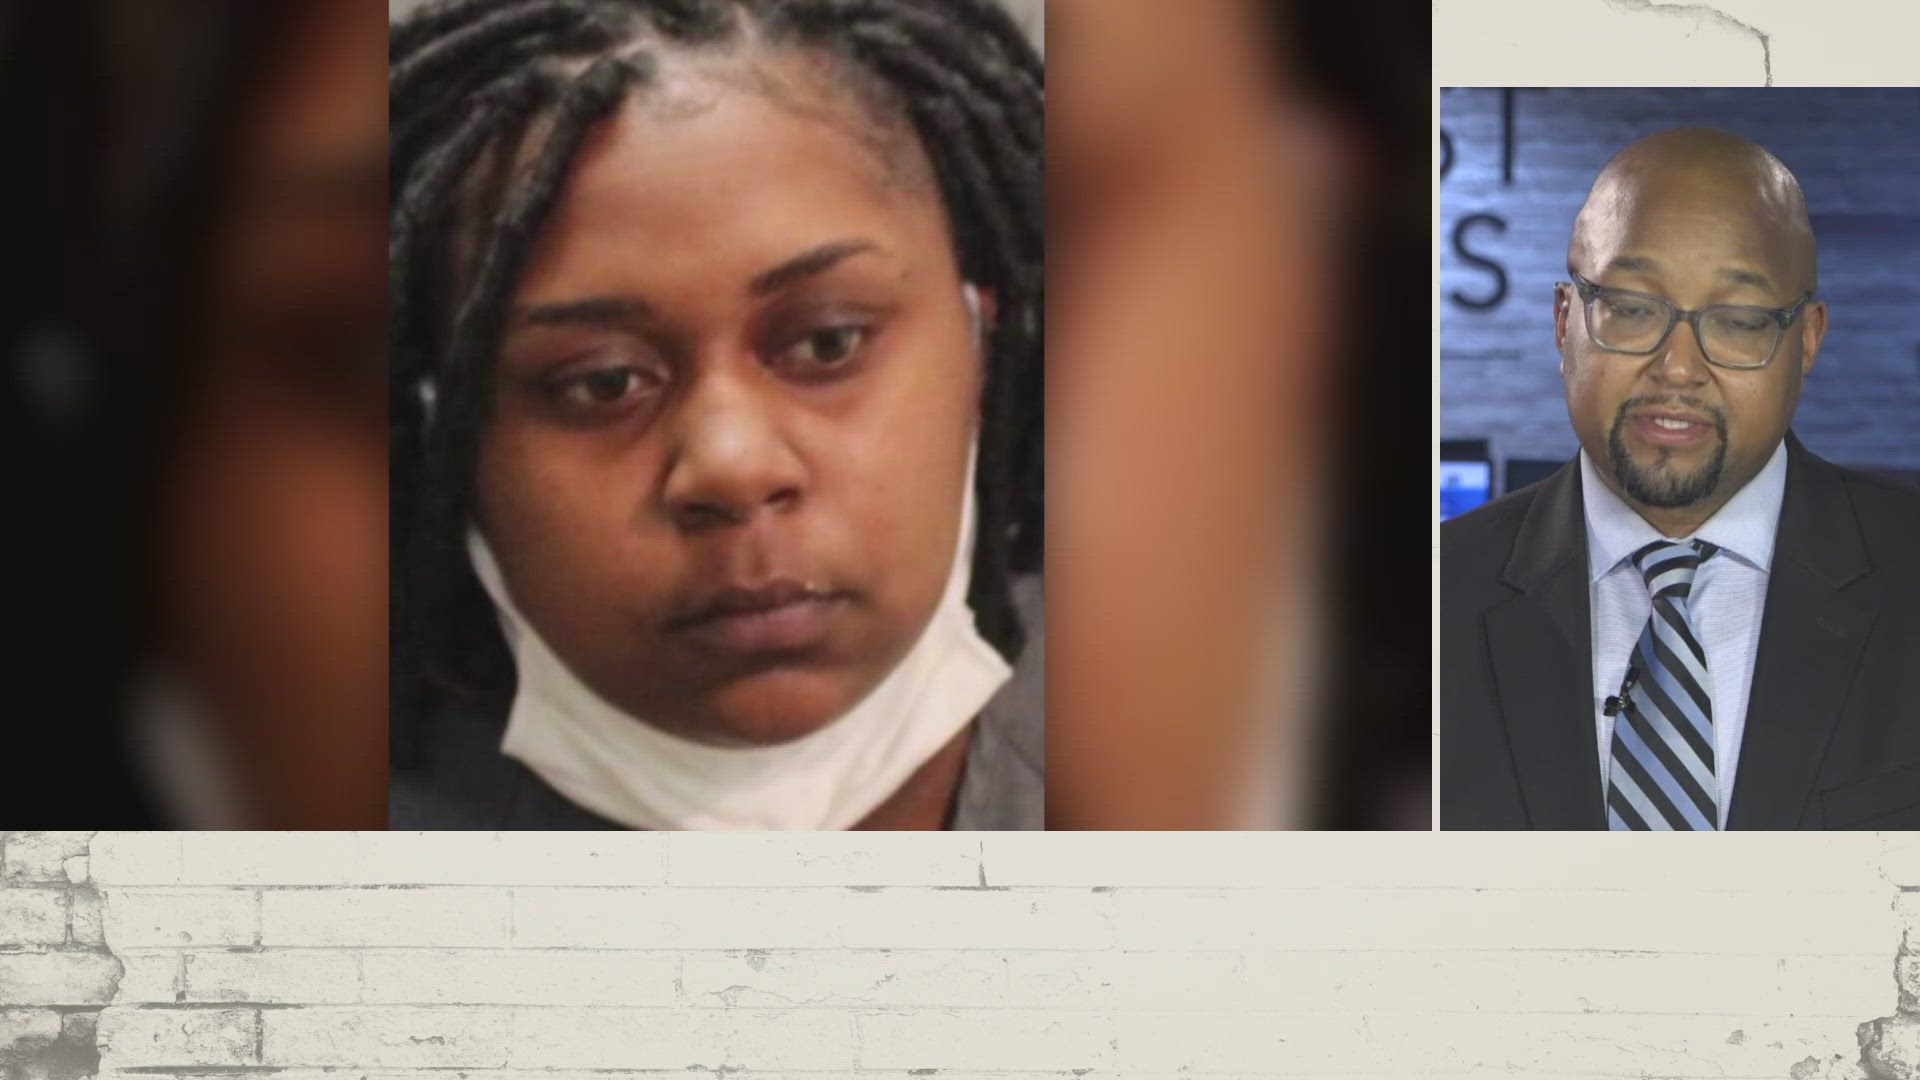 Shaetavia Cooper was given a second trial after her first ended in a mistrial. Thursday, she was found guilty.